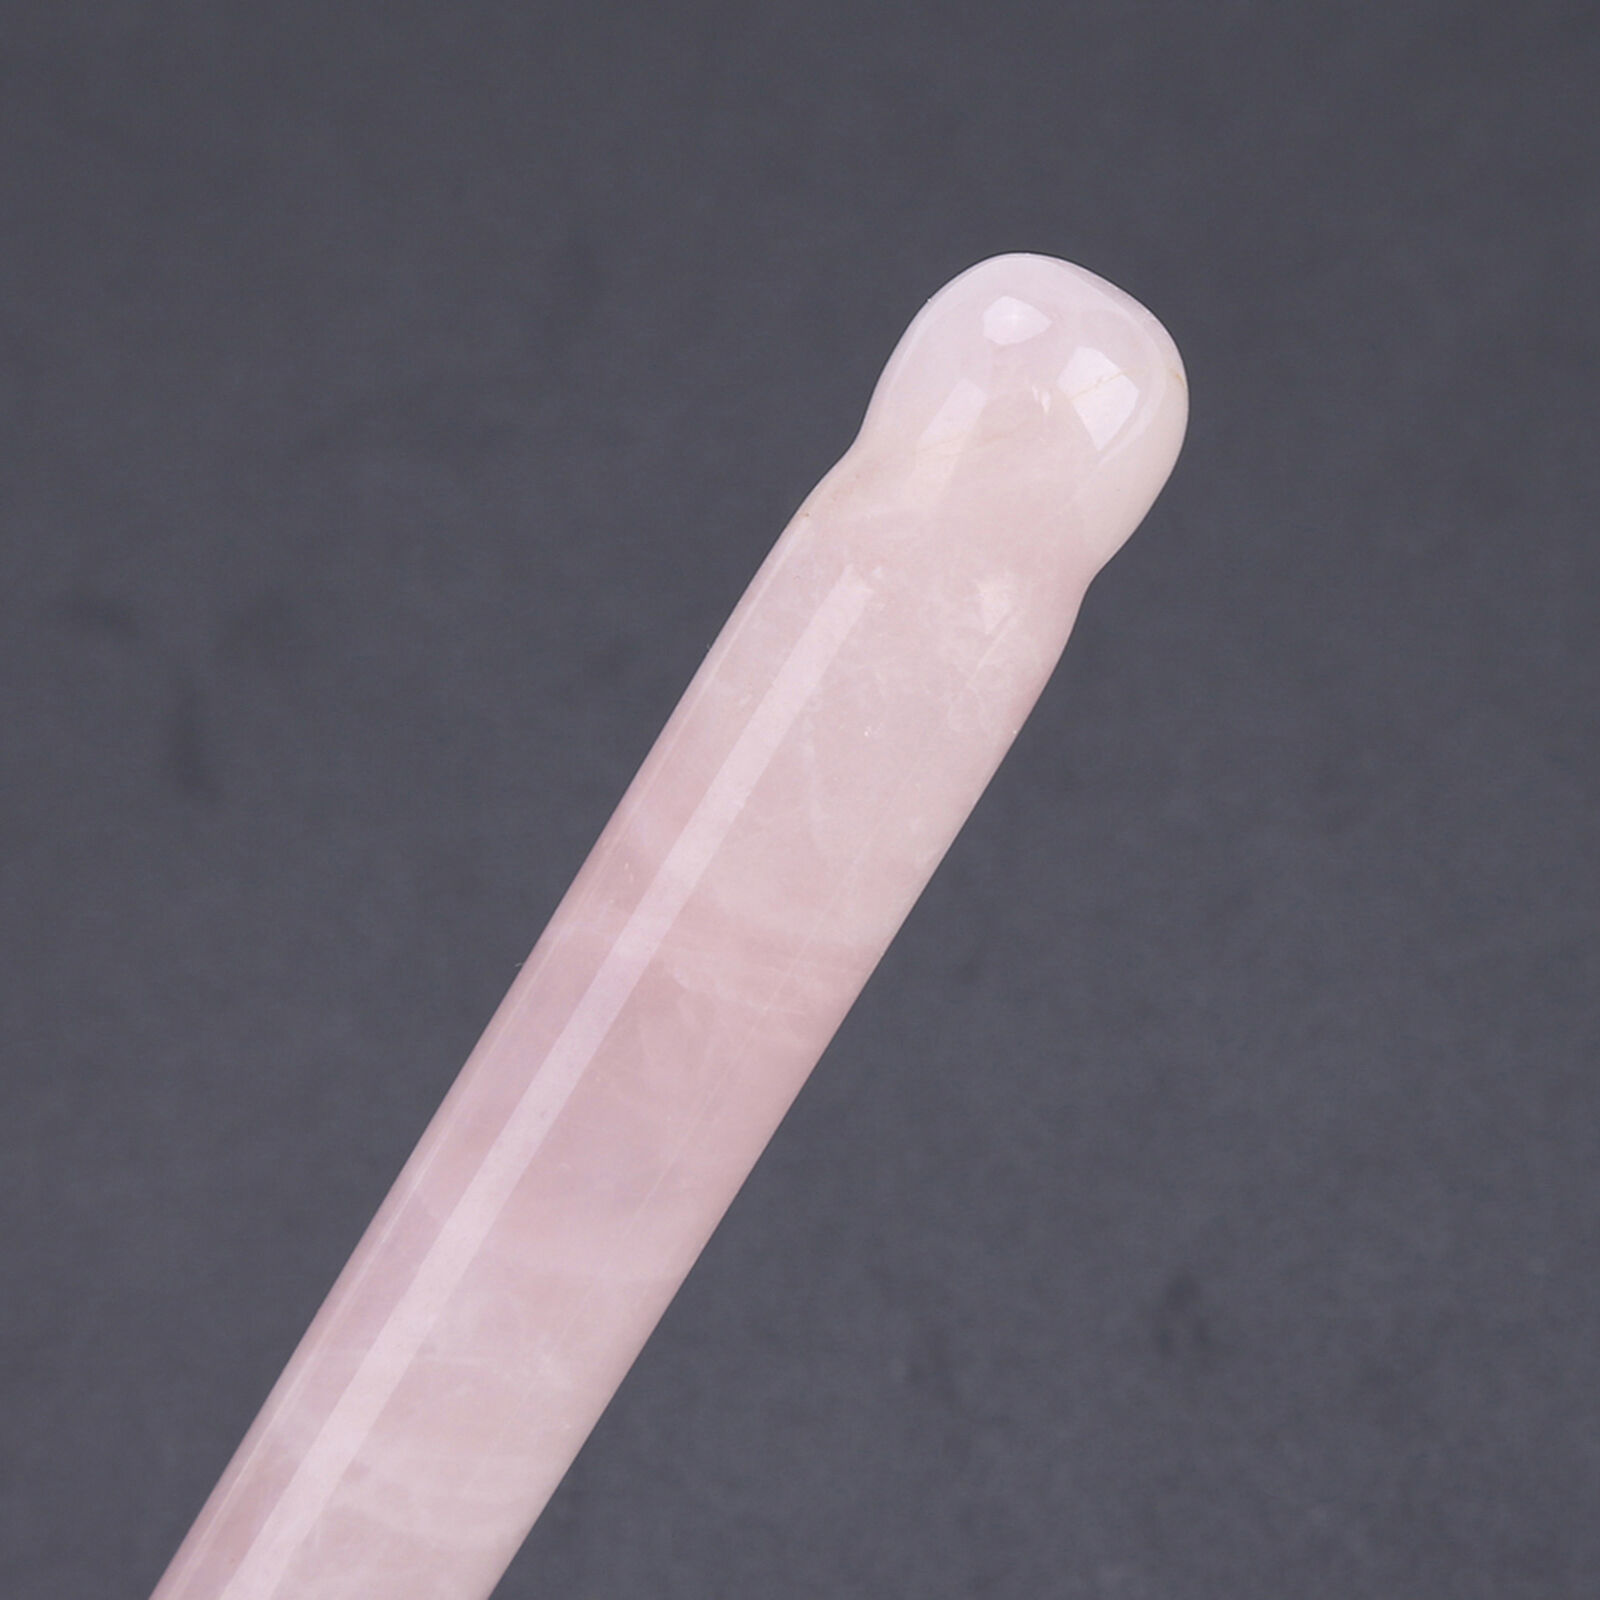 1PC Rose Quartz Massage Stick For Relaxation And Healing